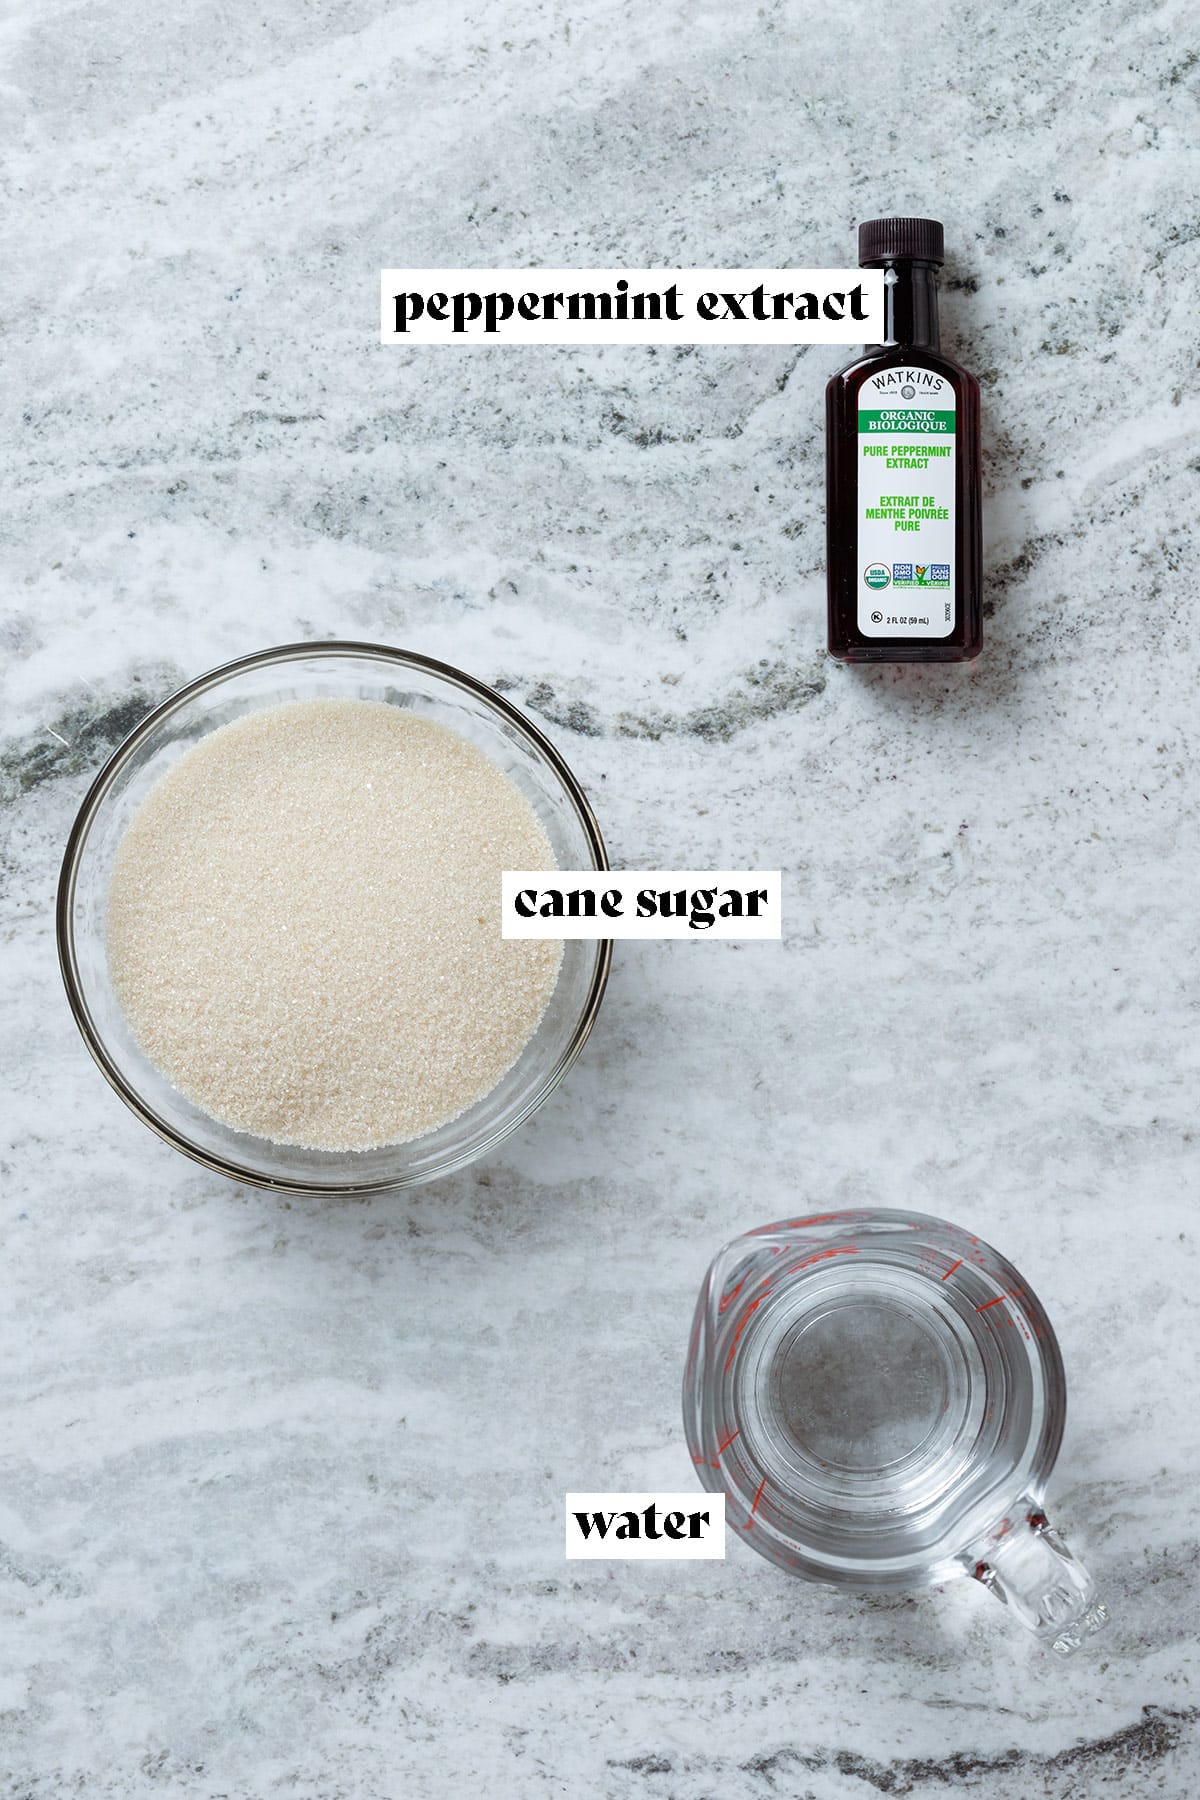 Peppermint extract, cane sugar, and water in bowls laid out on a grey background with text overlay.